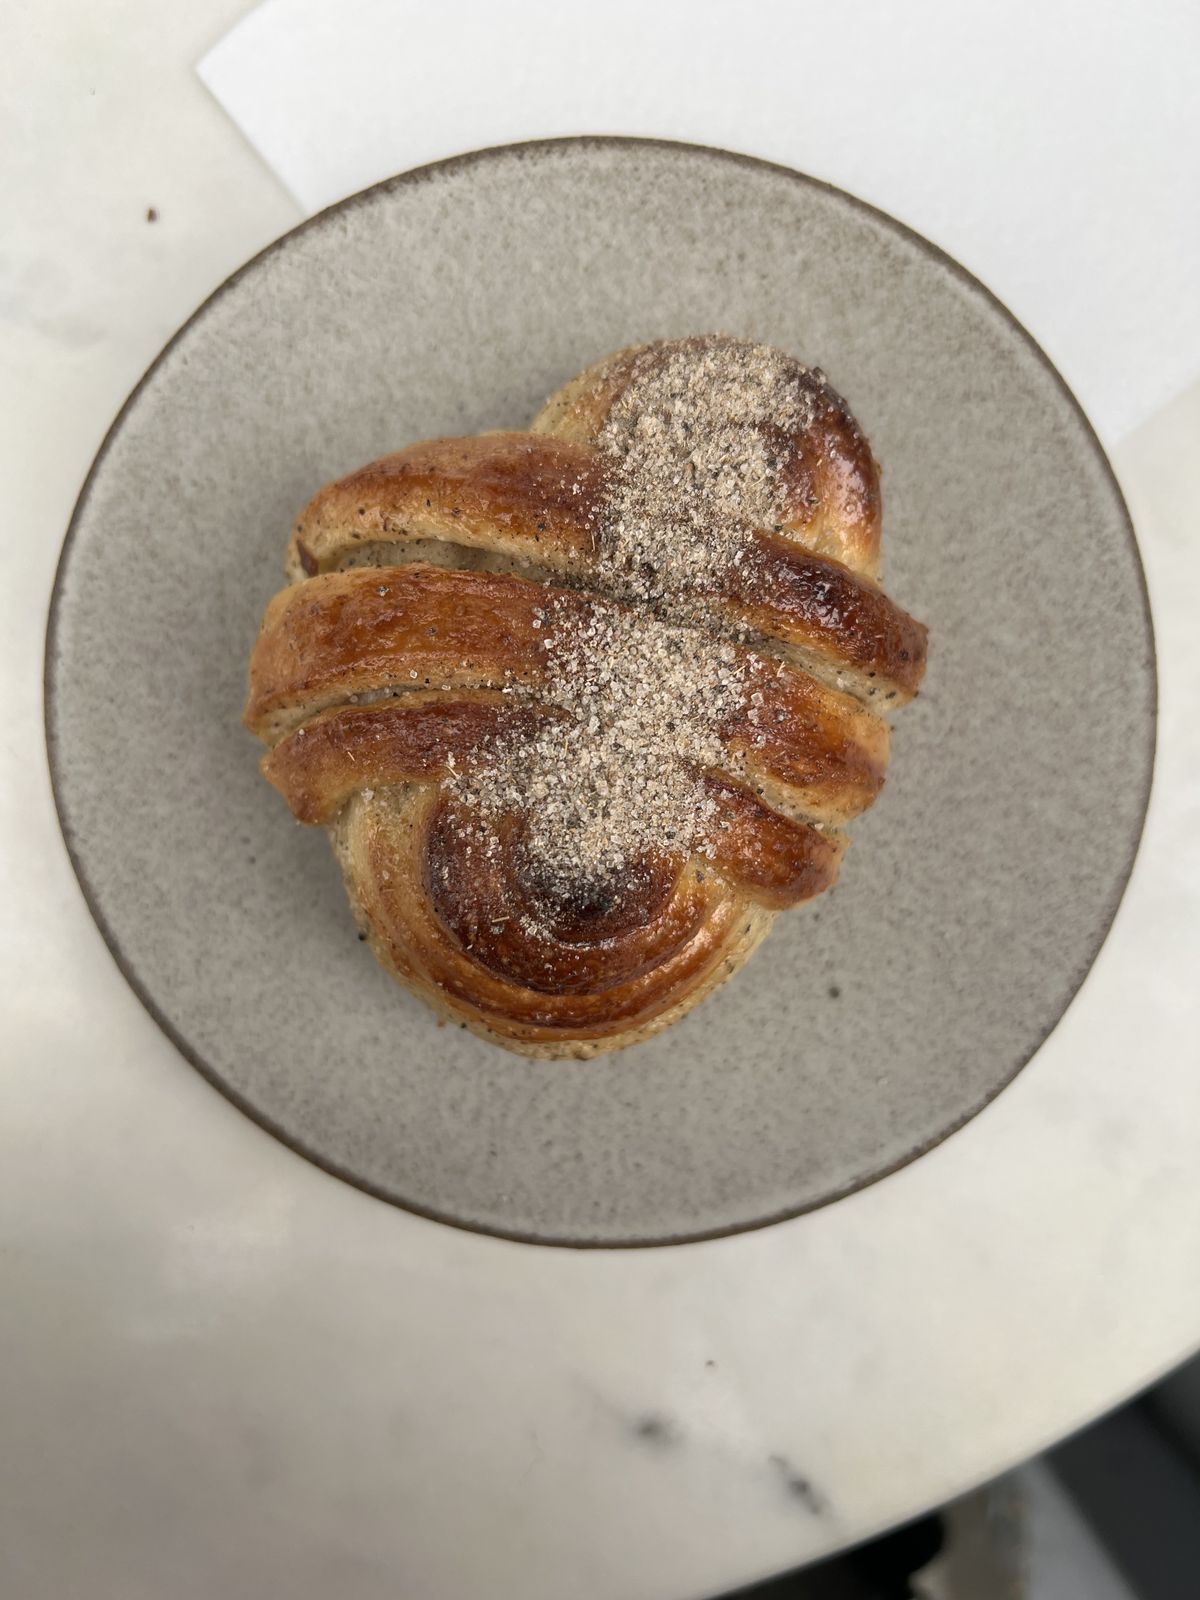 An overhead shot of the oven-burnished cardamom bun, sprinkled with sugar, sitting on a grey plate.